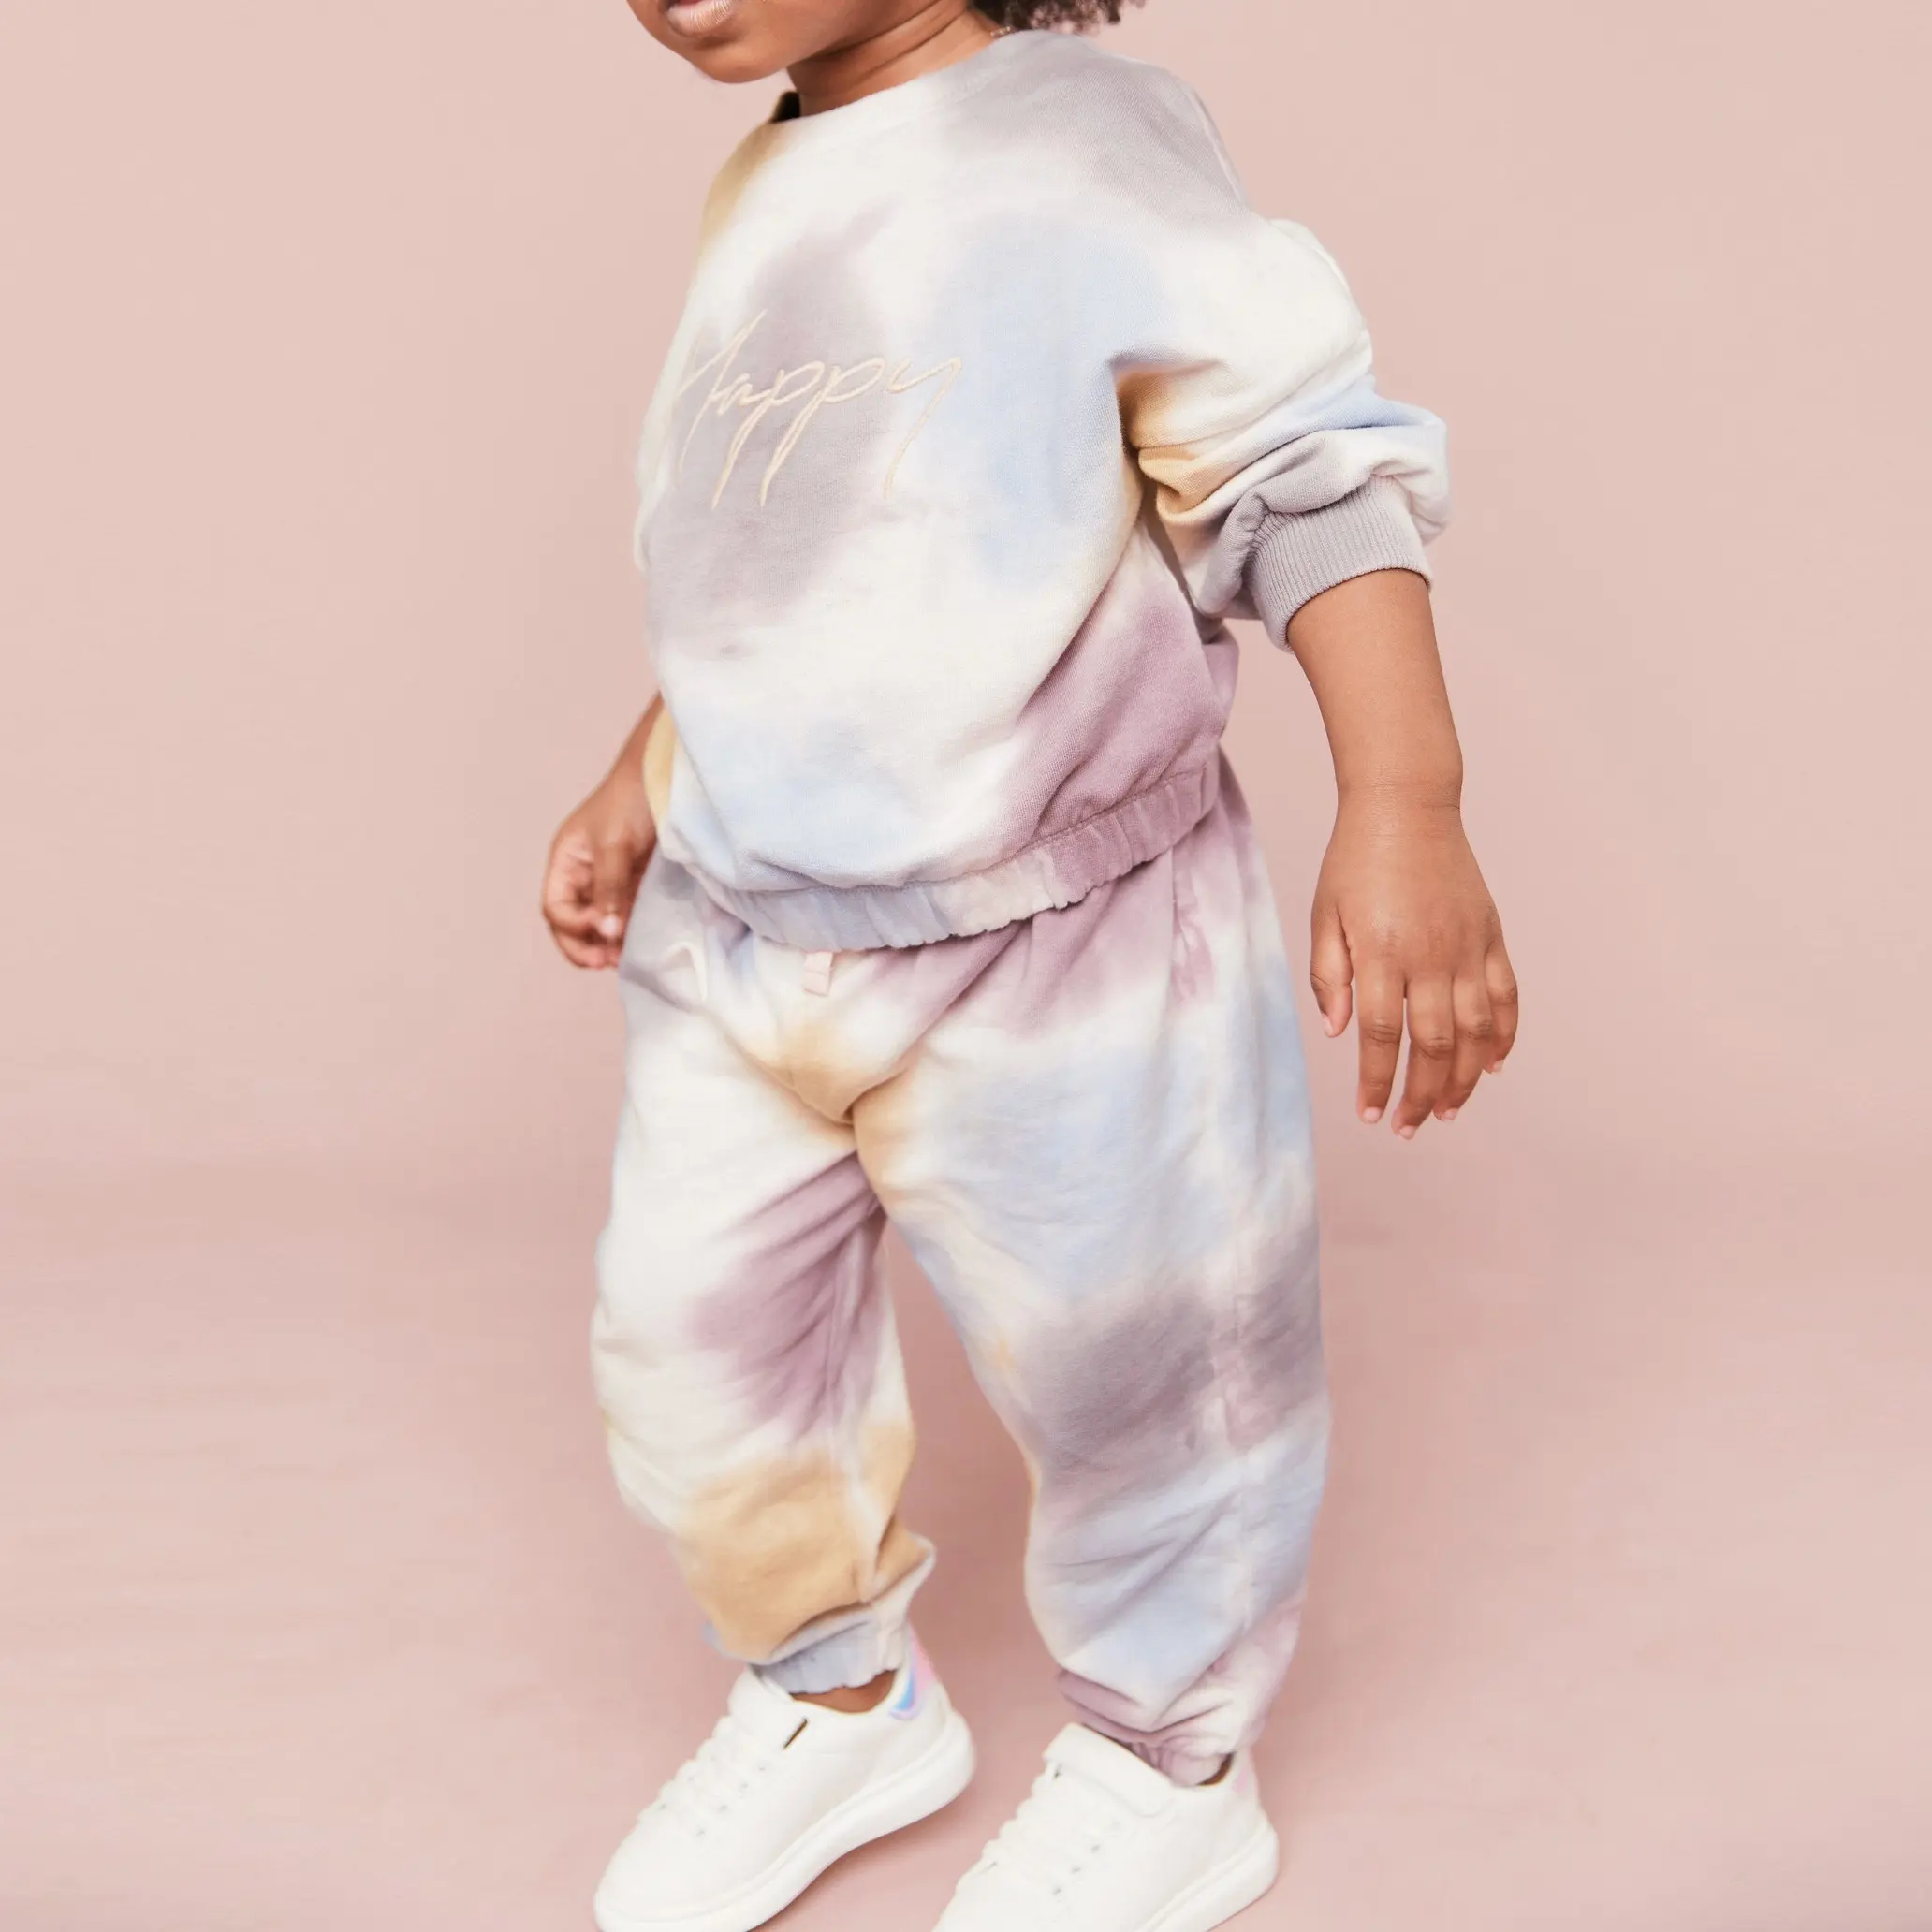 New Arrival Customized Tie Dye embroidery baby sweatshirt+joggers top quality unisex kids tracksuits set 2021